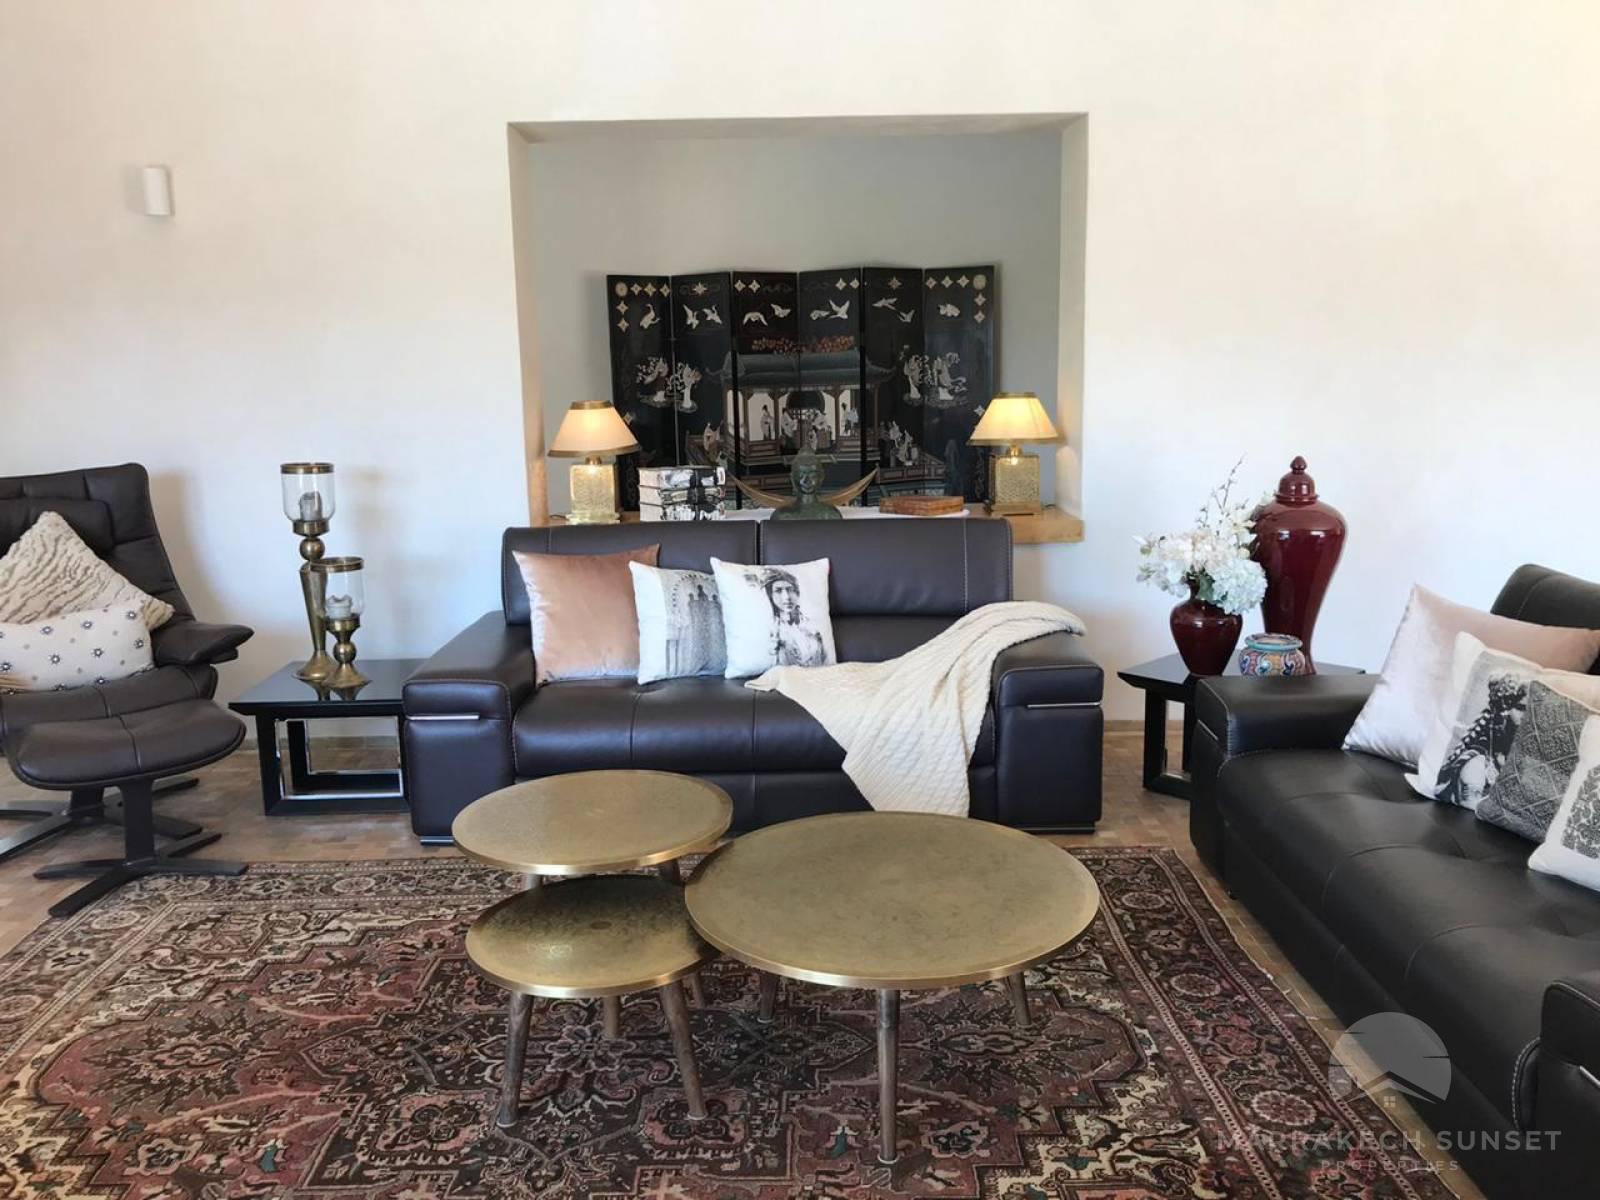 Luxury Villa for sale Marrakech in one of the most prestigious residential & golf complex in Marrakech